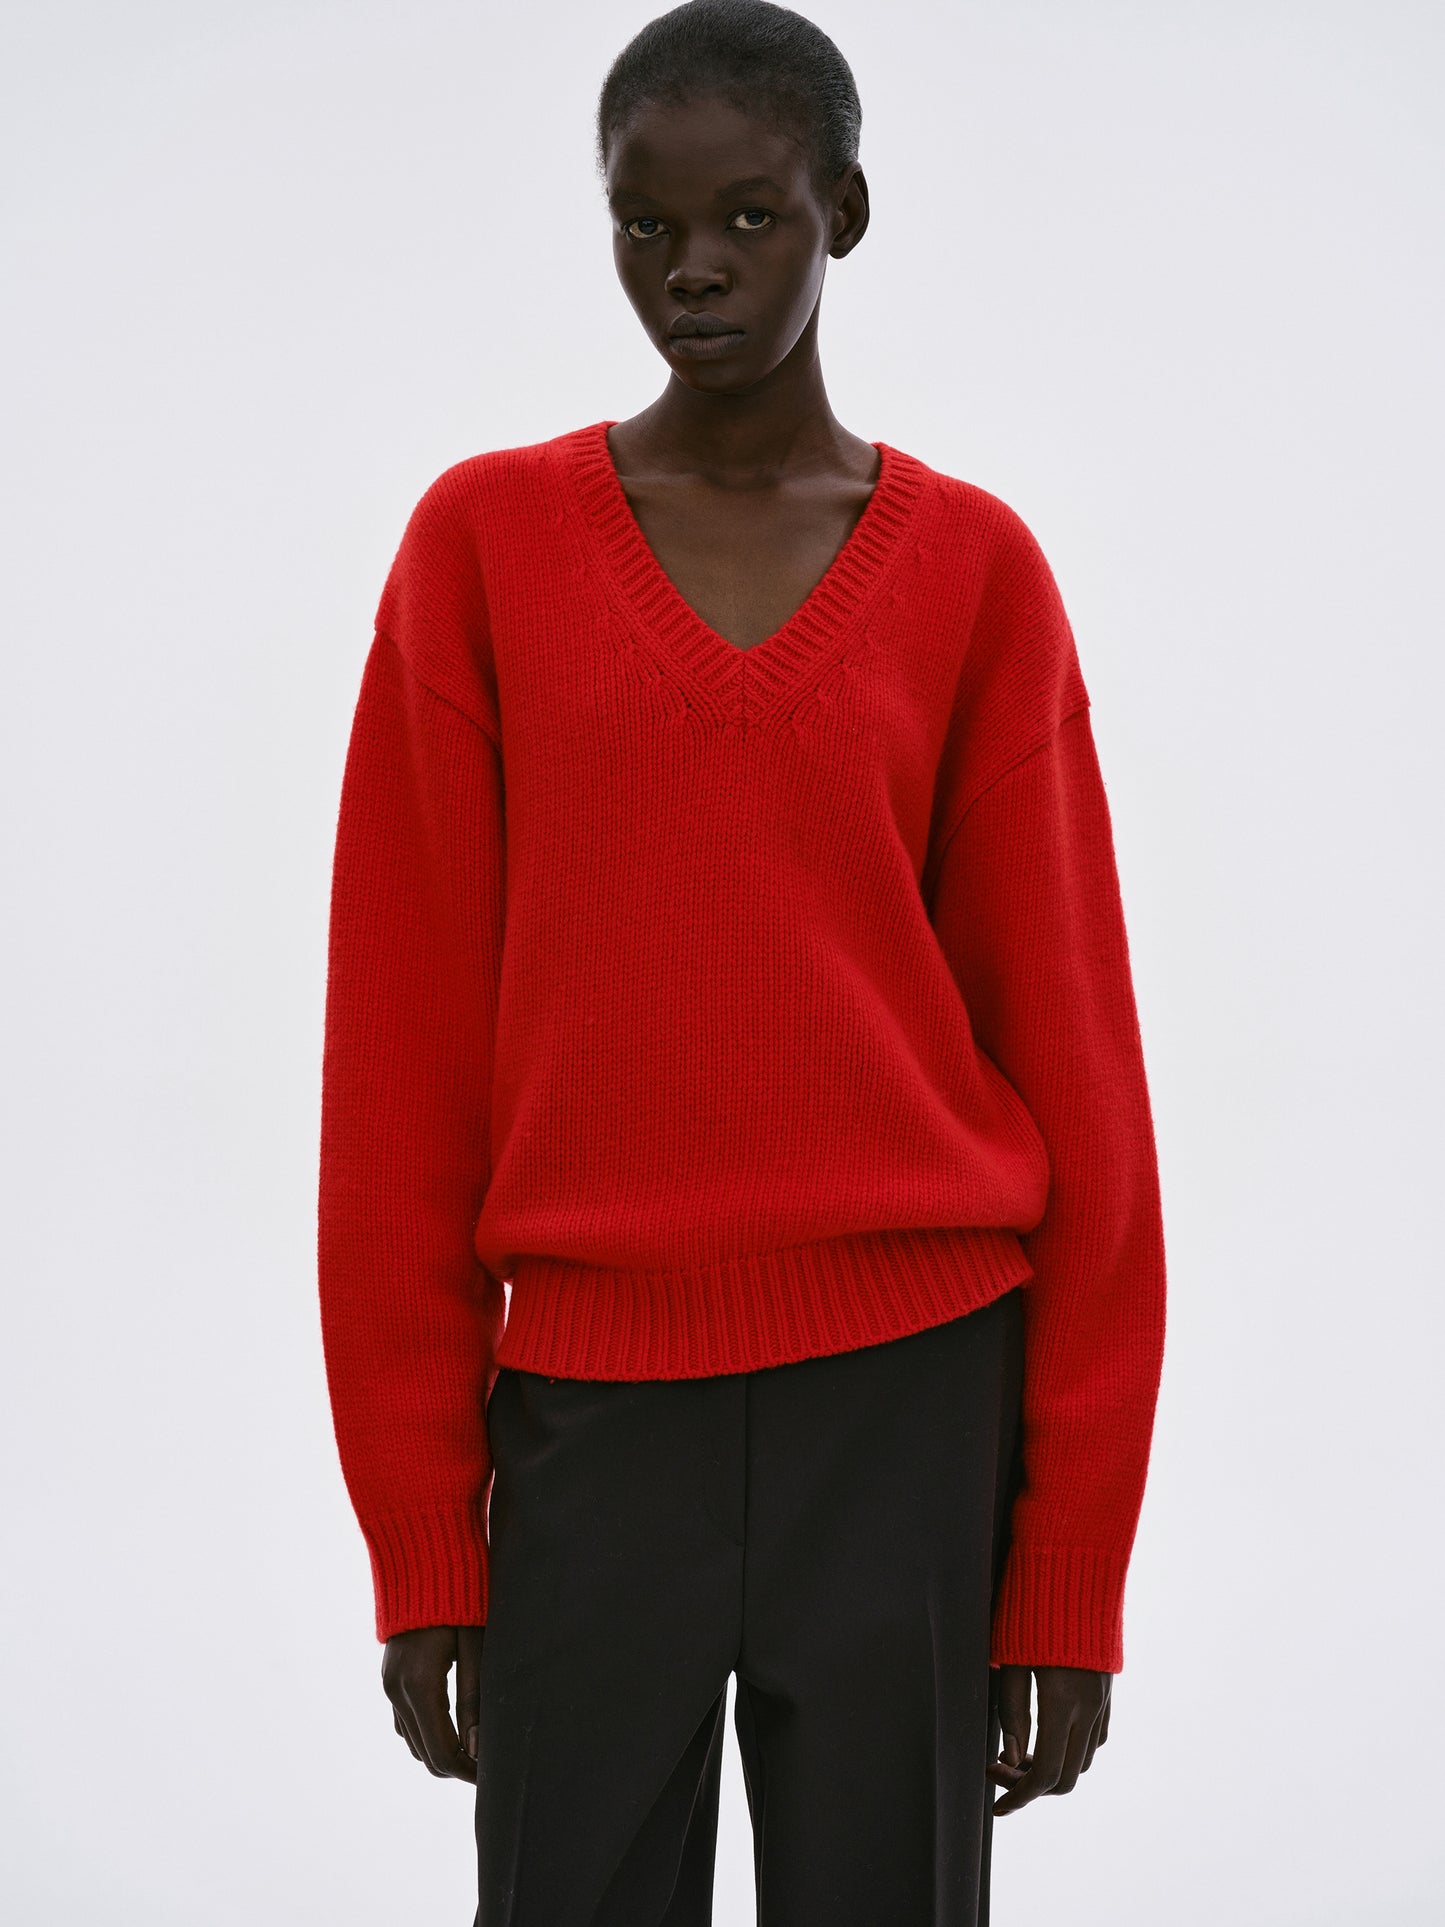 Extra-Fine Wool Jumper, Red